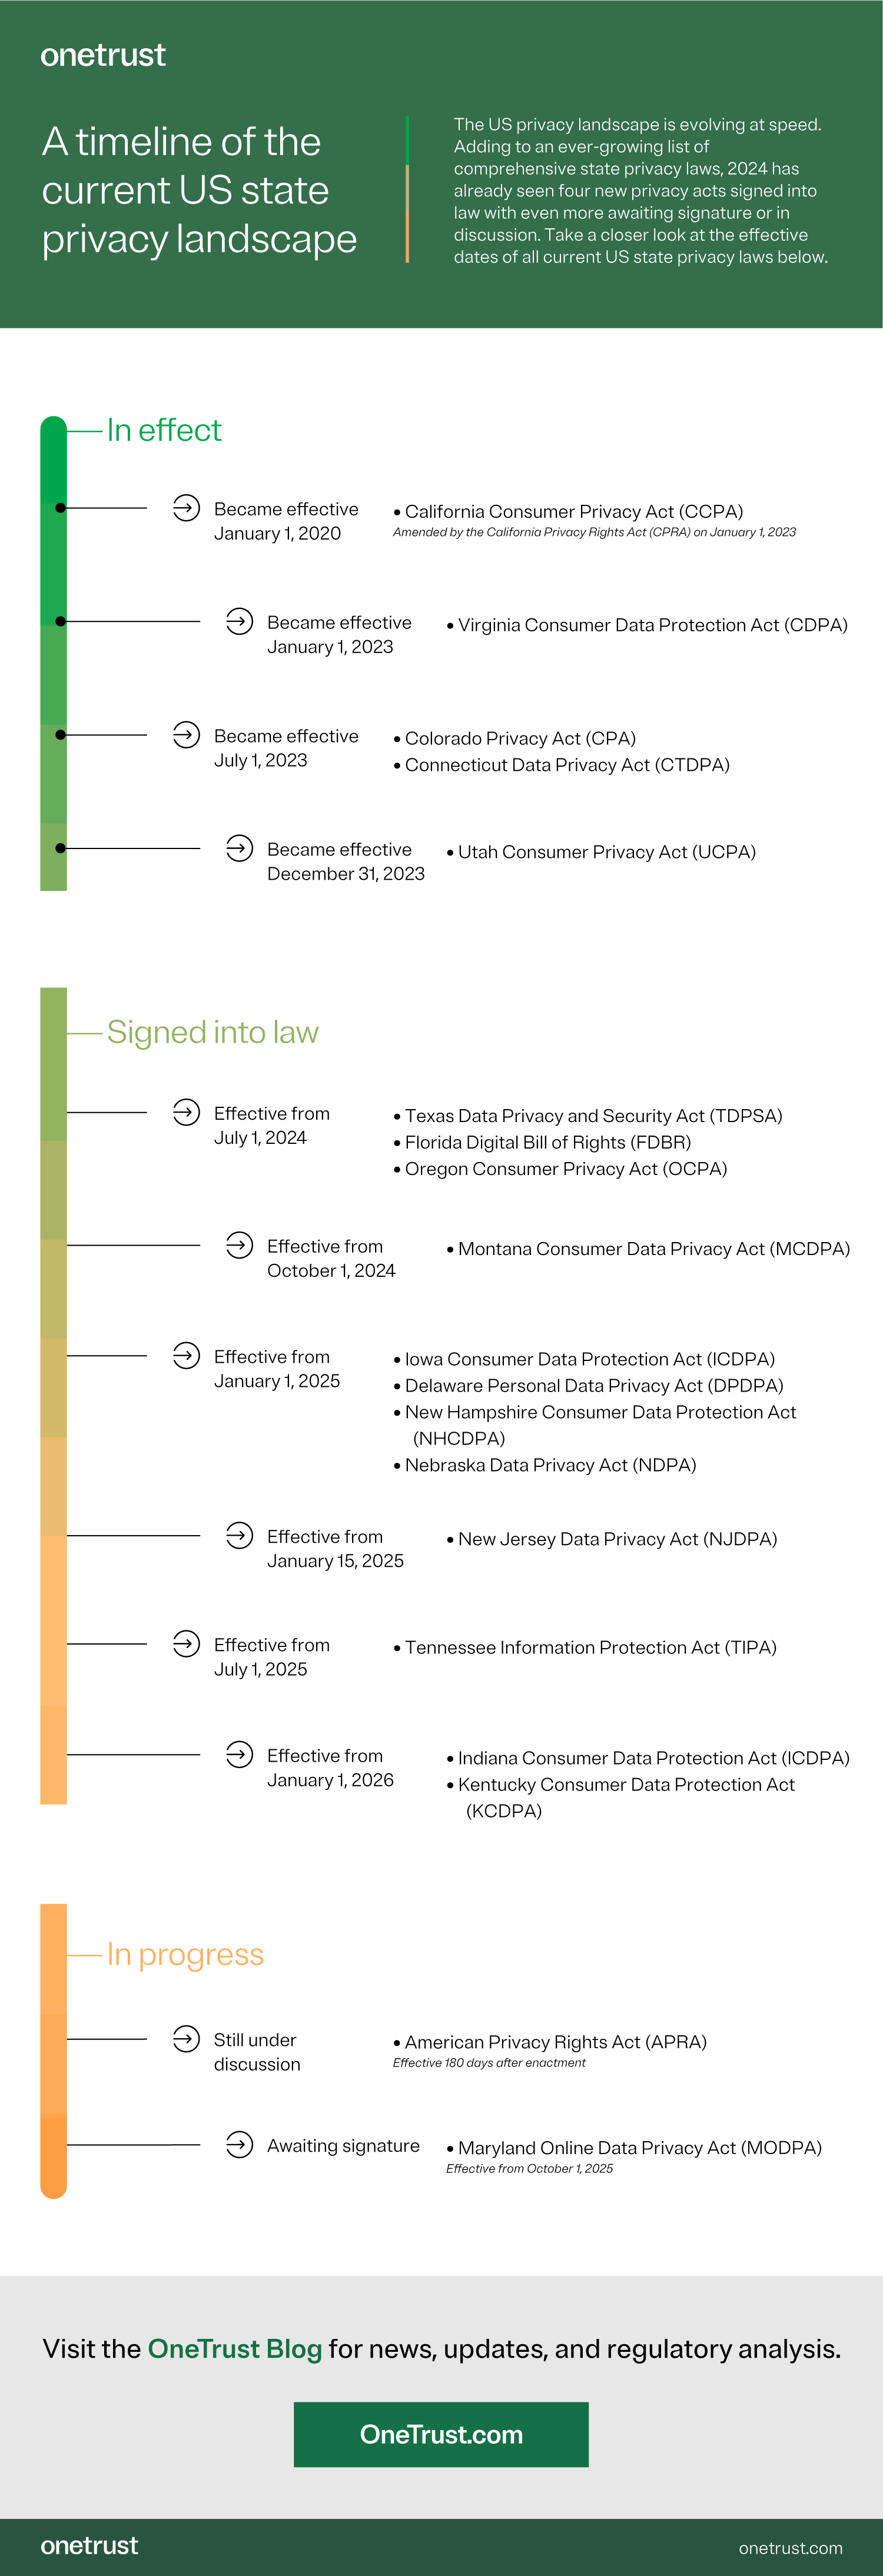 Click here to download the "Timeline of the current US state privacy landscape" infographic